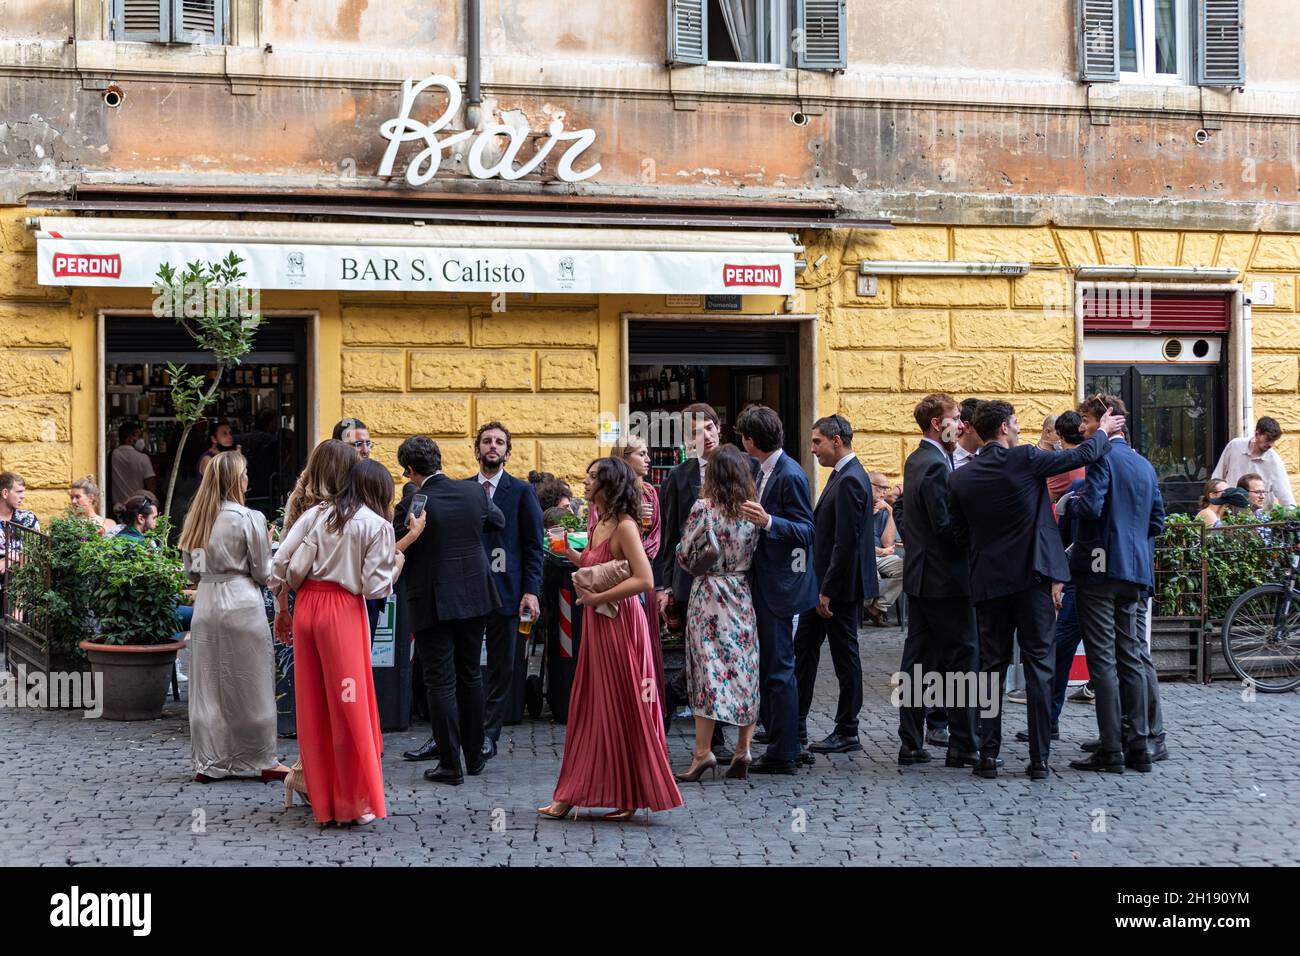 People enjoying beverages on Piazza di San Calisto in front of Bar S. Calisto in Trastevere district of Rome, Italy Stock Photo